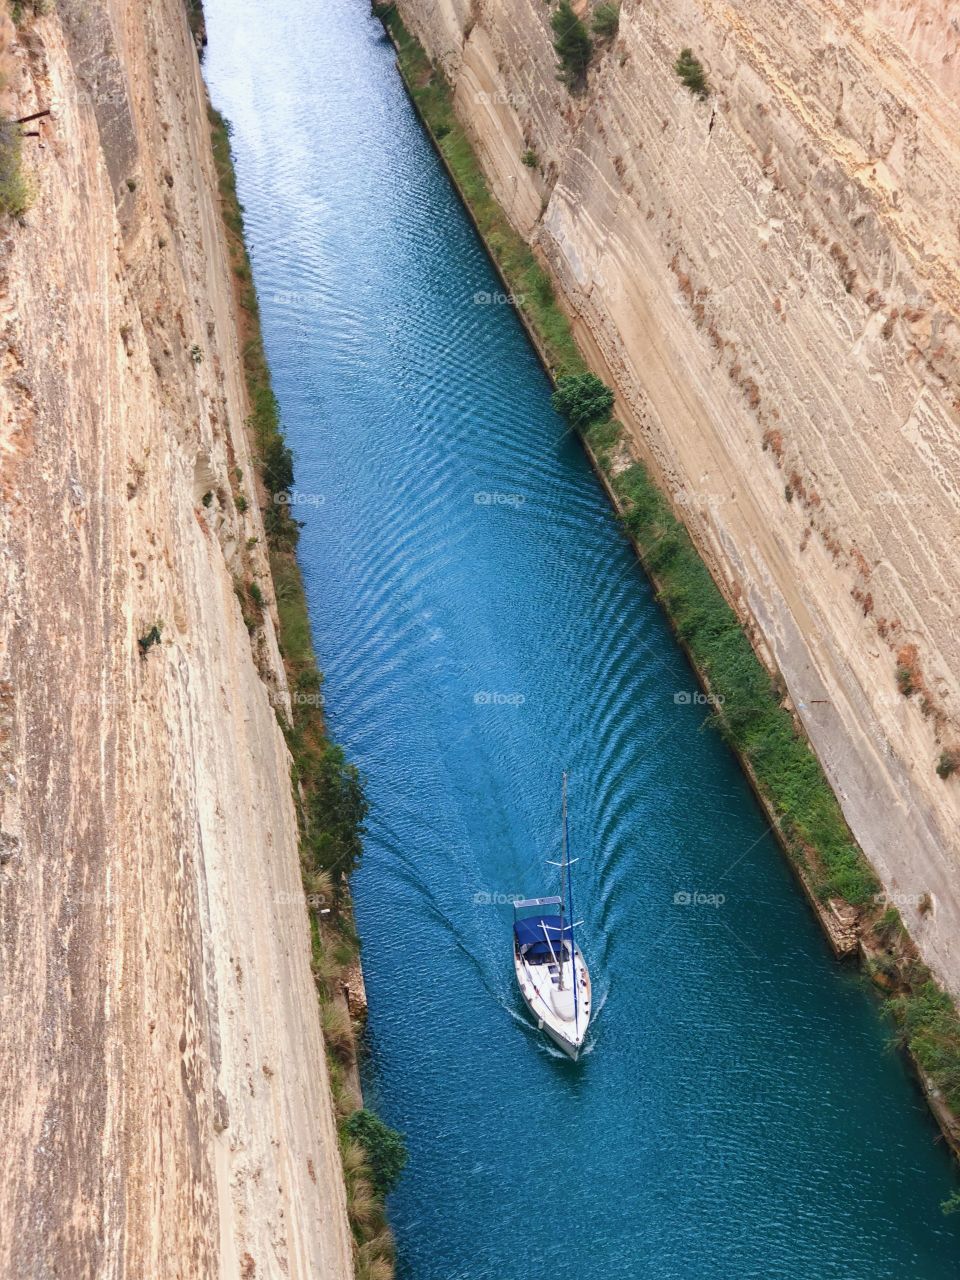 A little boat in this Greek canal, who knows where it’s going. This photo makes me wanna travel again..🚤